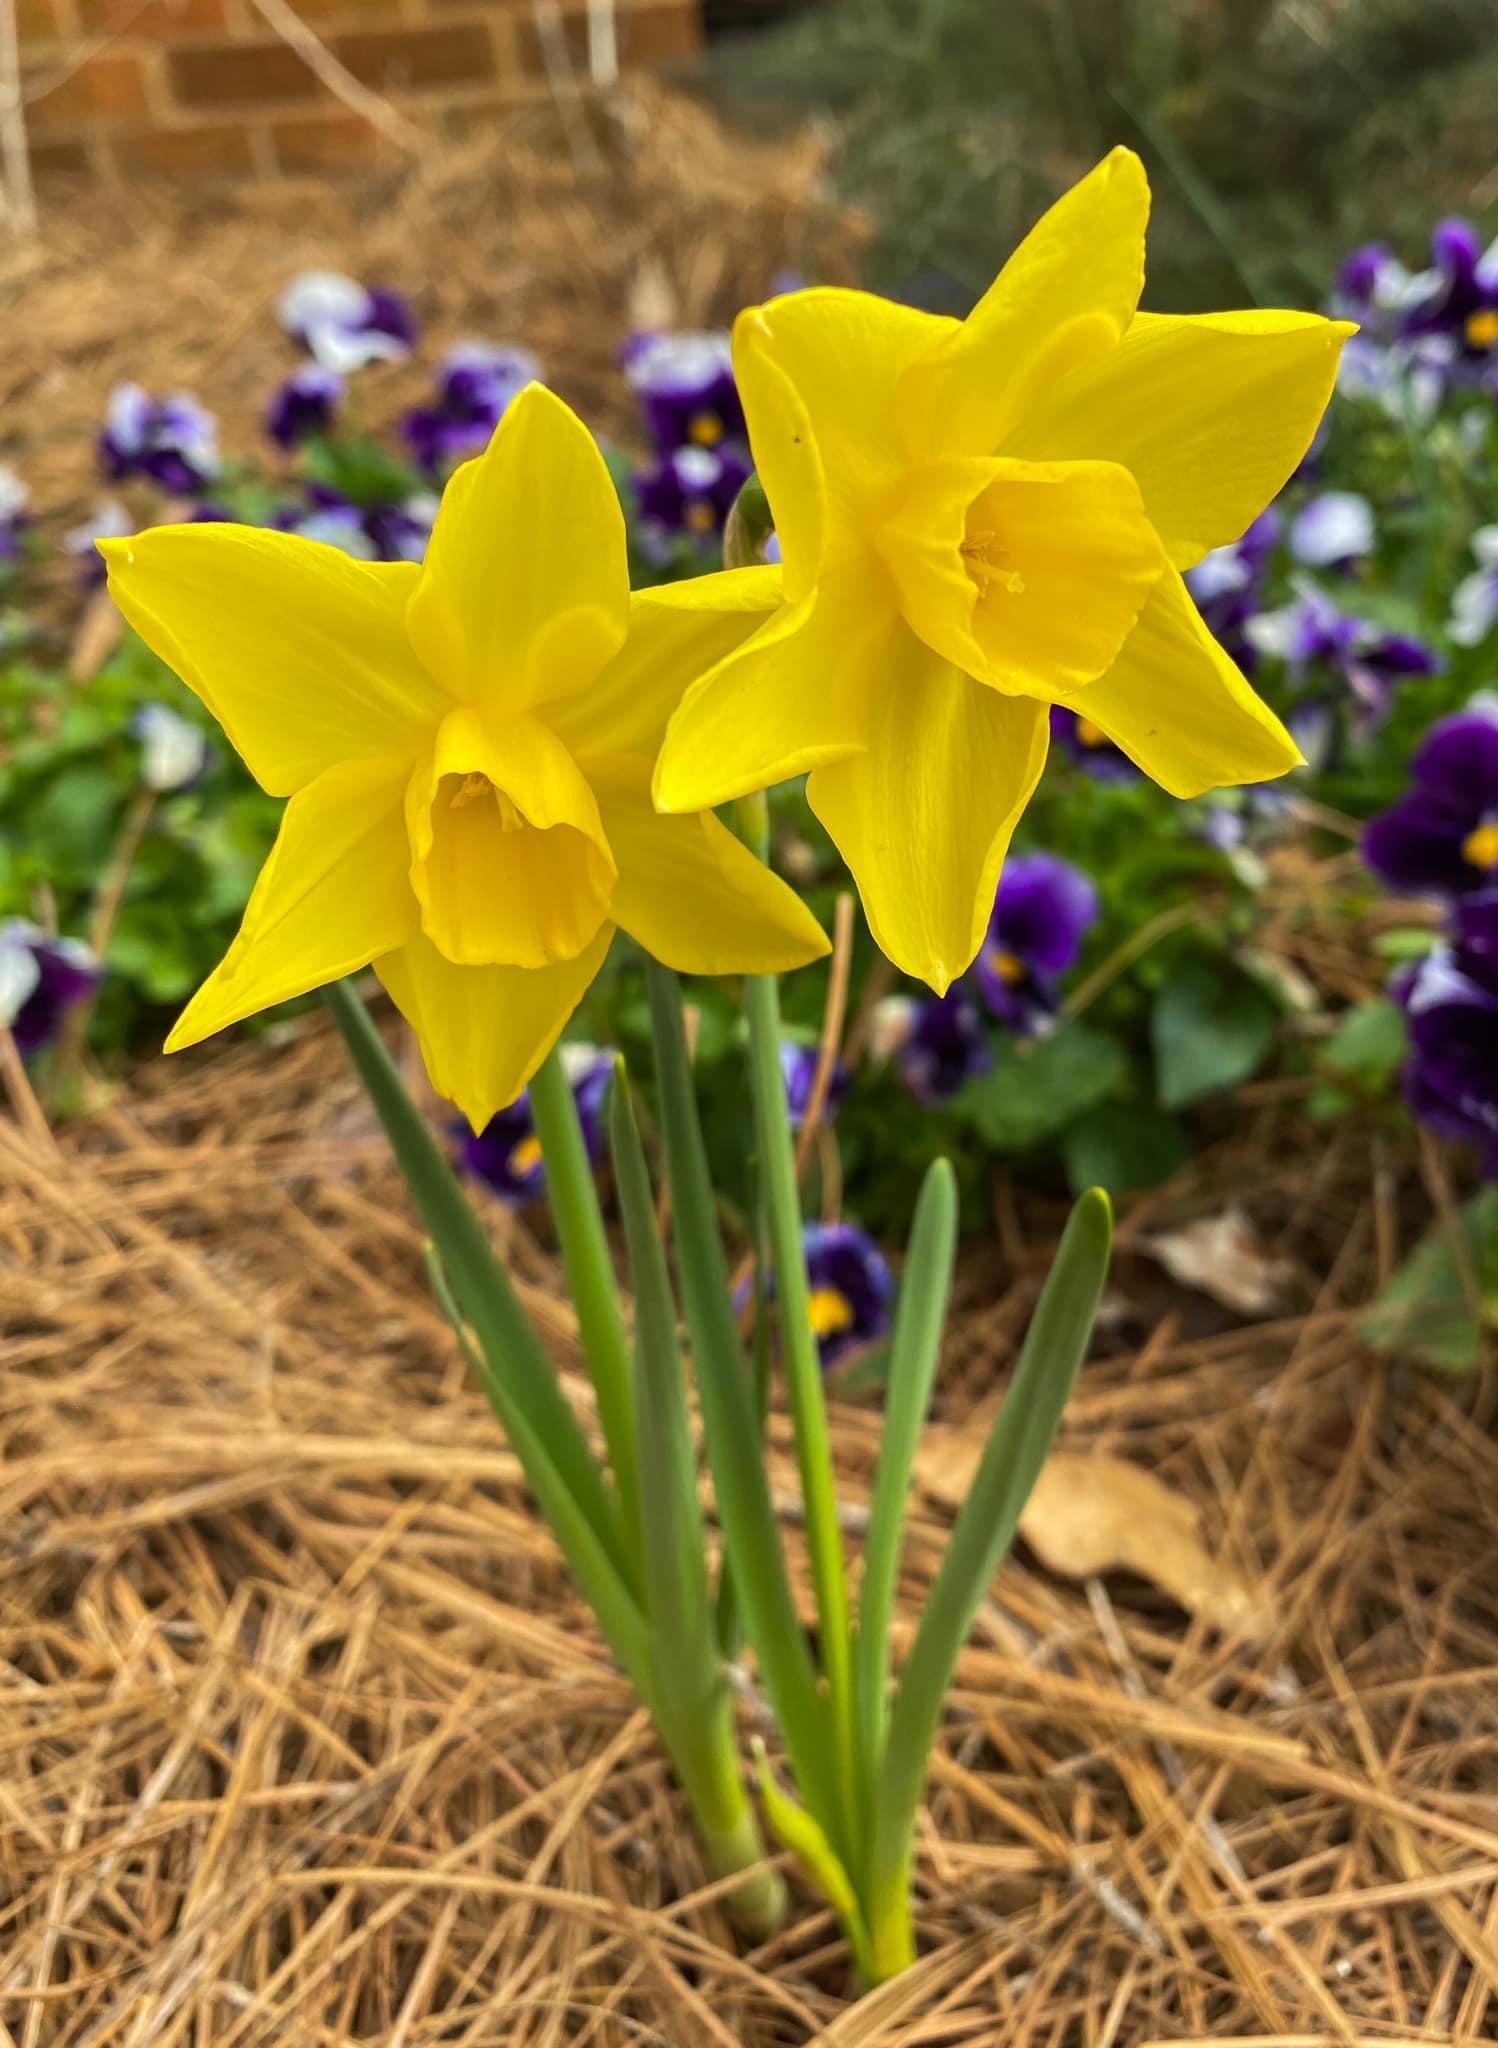 Our Daffodils 